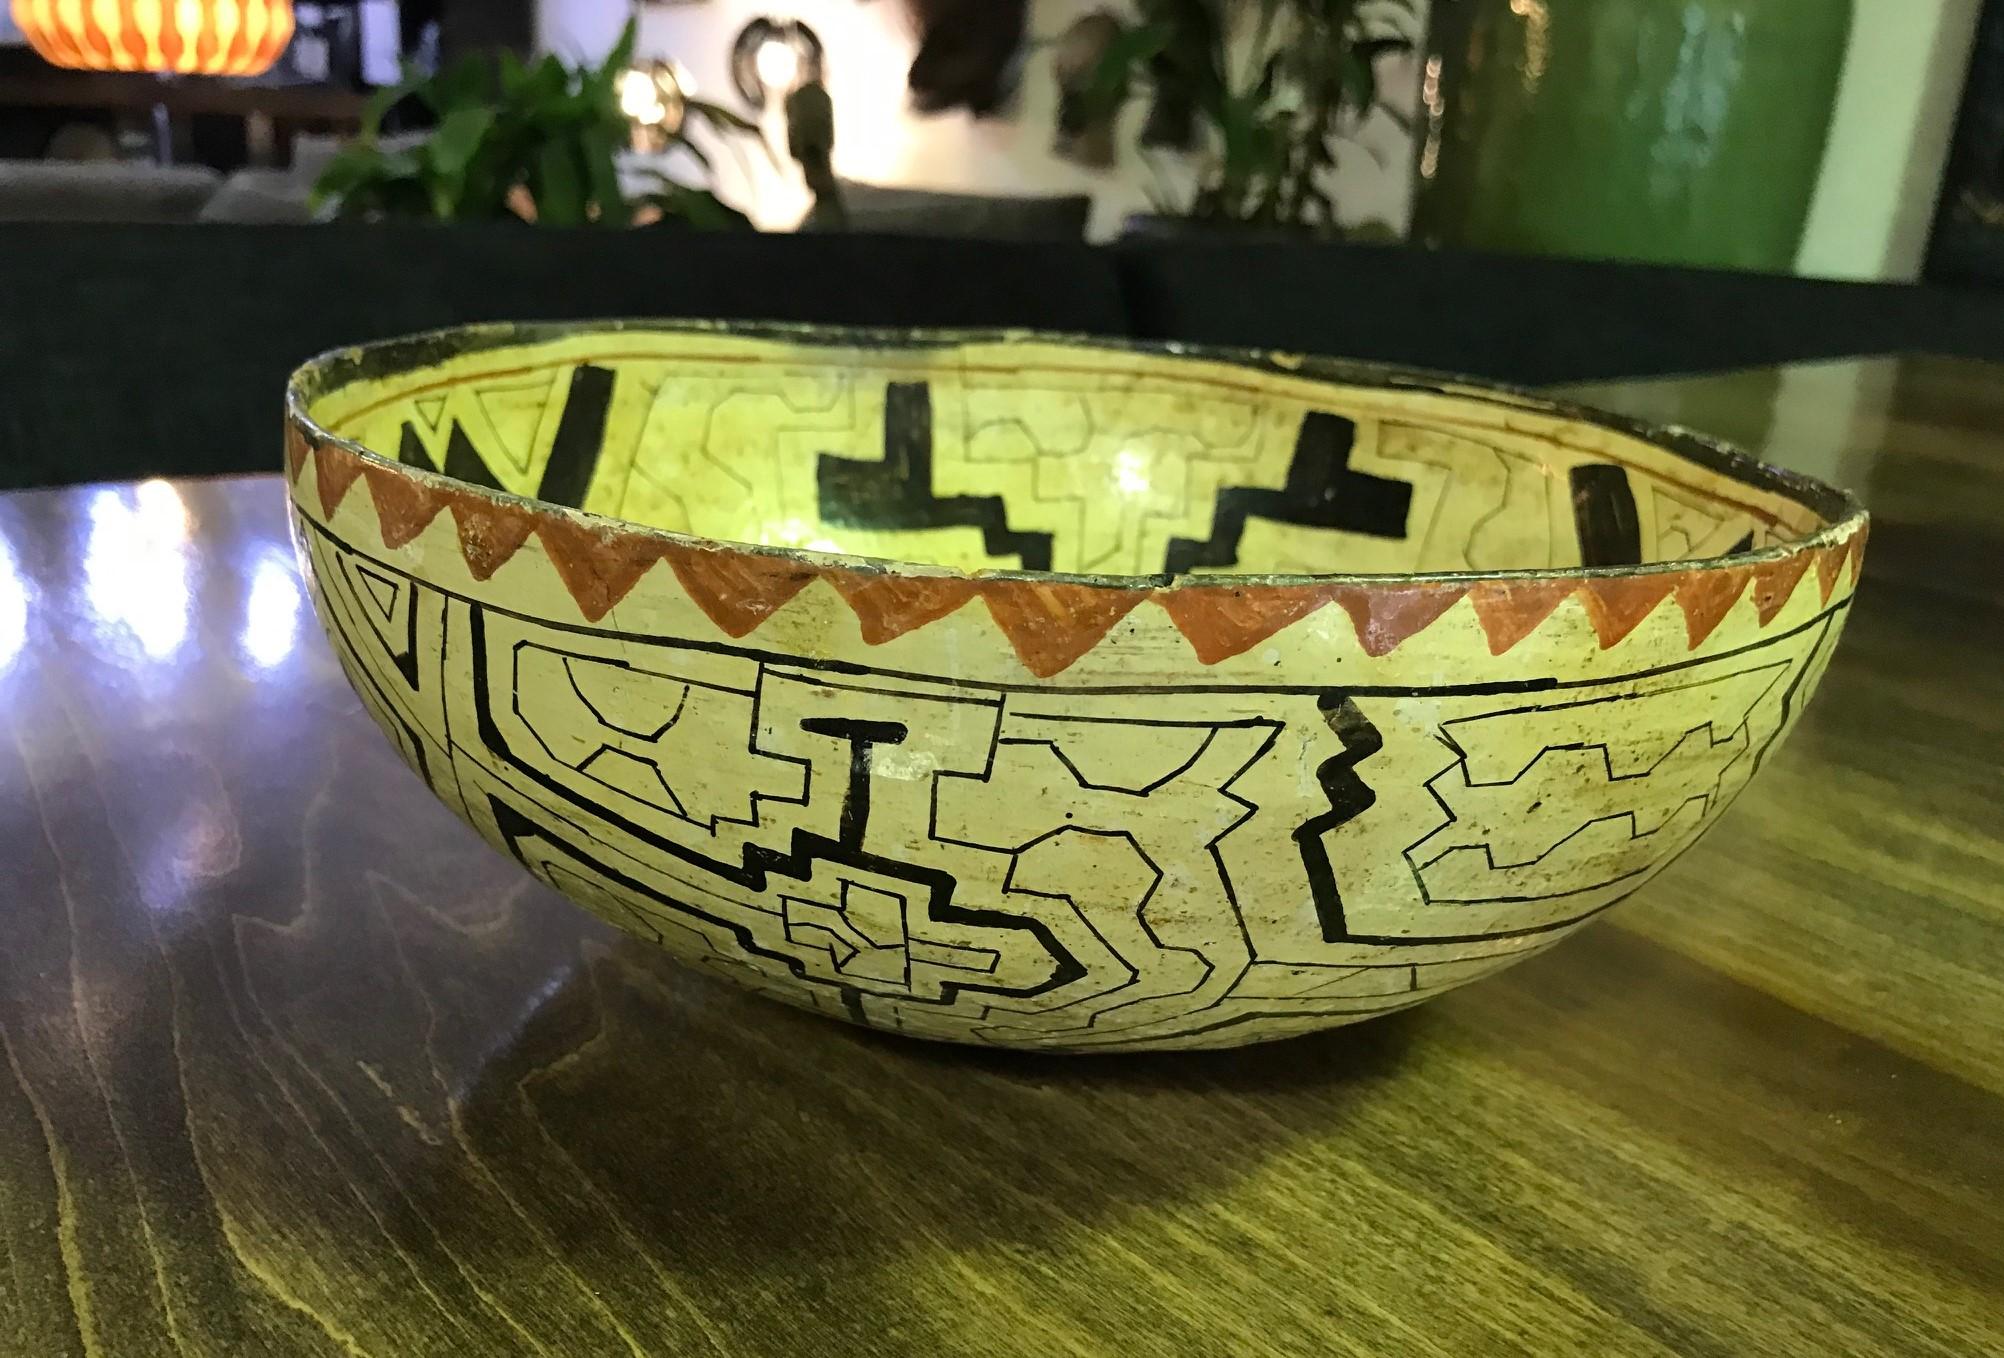 A wonderful geometric patterned and designed hand painted and glazed Native American earthenware bowl. We believe it was made by the Shipibo-Conibo people, an indigenous people along the Ucayali River in the Amazon rainforest in Peru.

Would be a